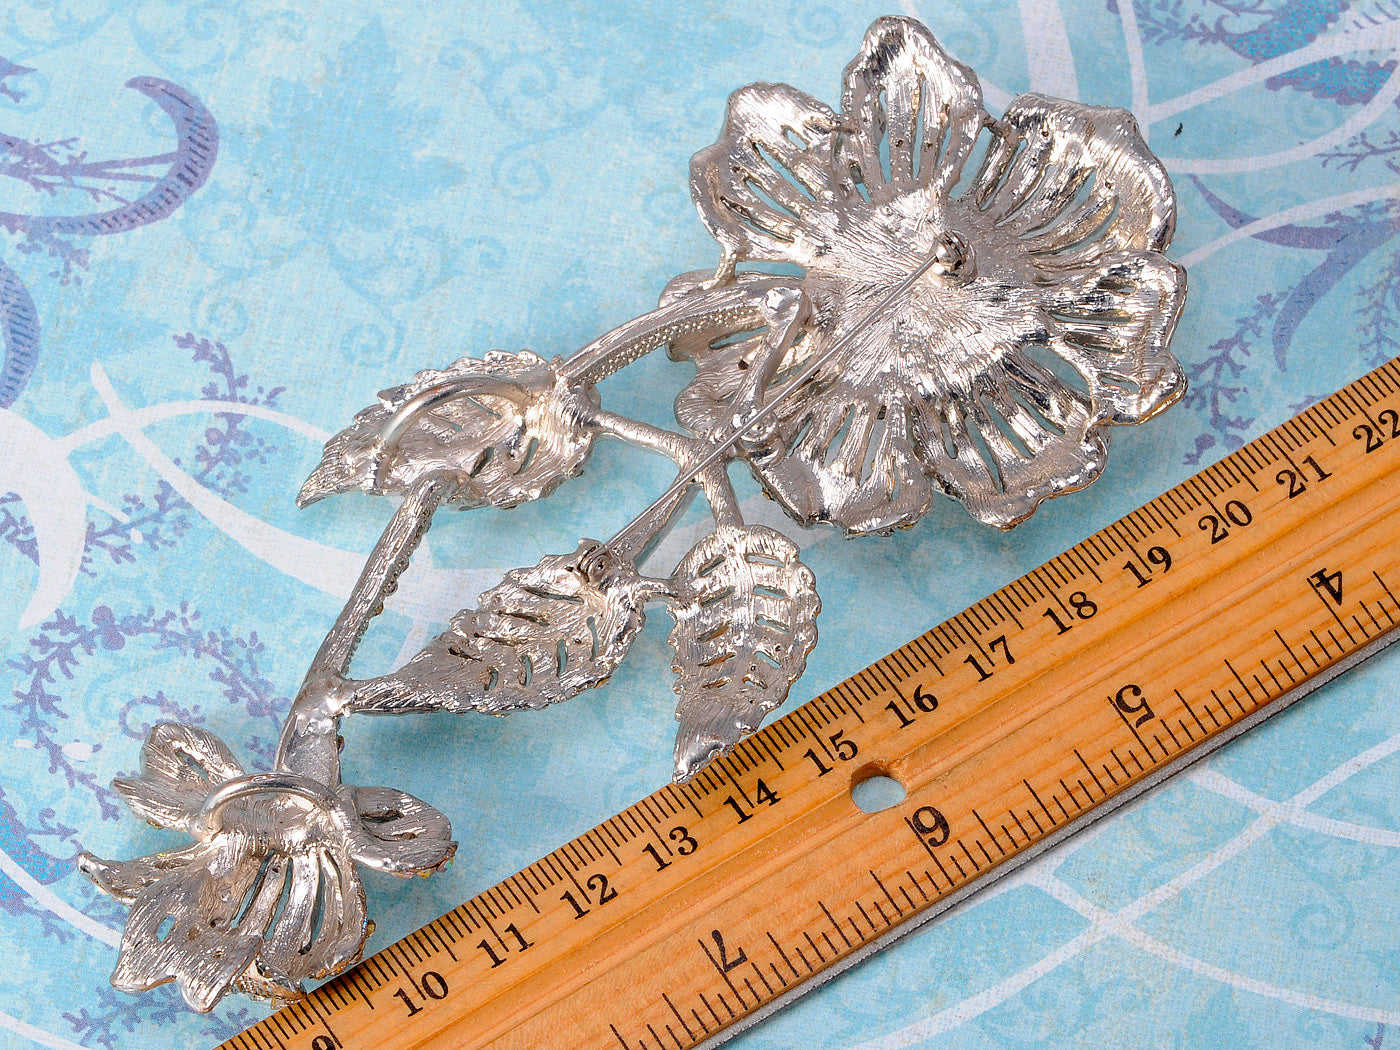 Vintage Iridescent Flower Prom Corsage Wedding Floral Brooch Pin